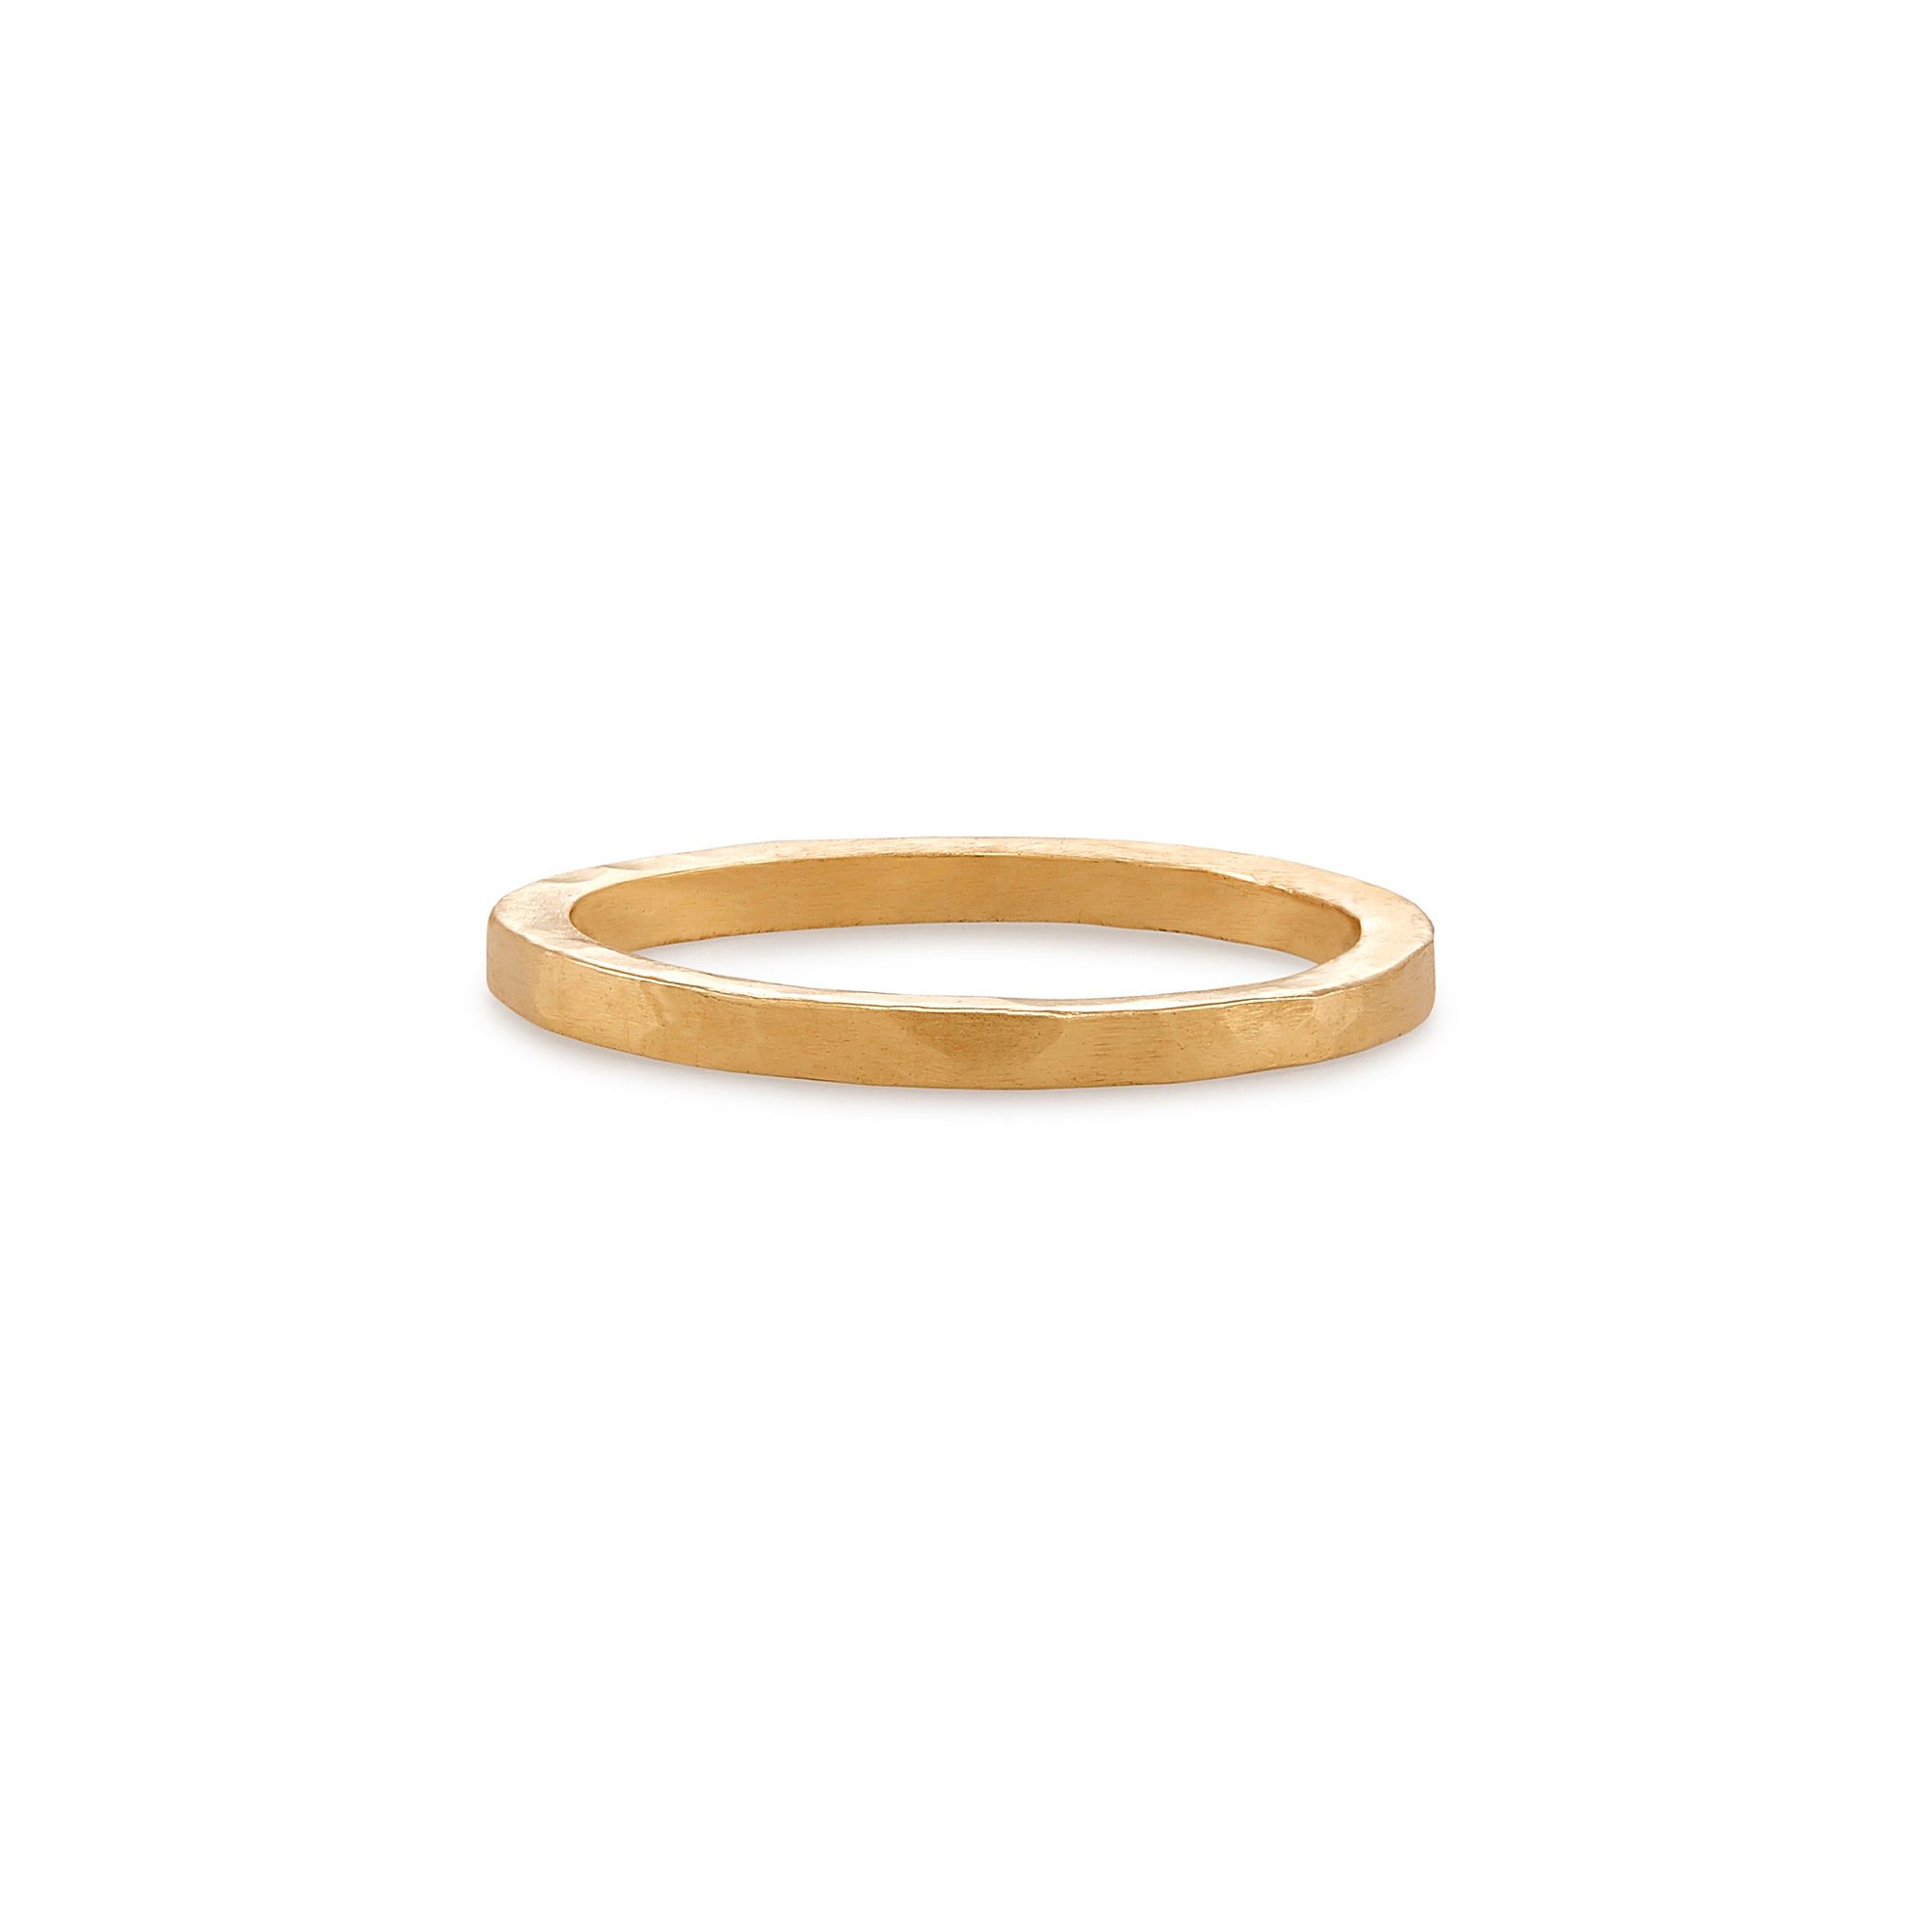 The 2mm Classic Band is a simple, classic hammered ring in 14k gold that is the perfect addition to any collection.  